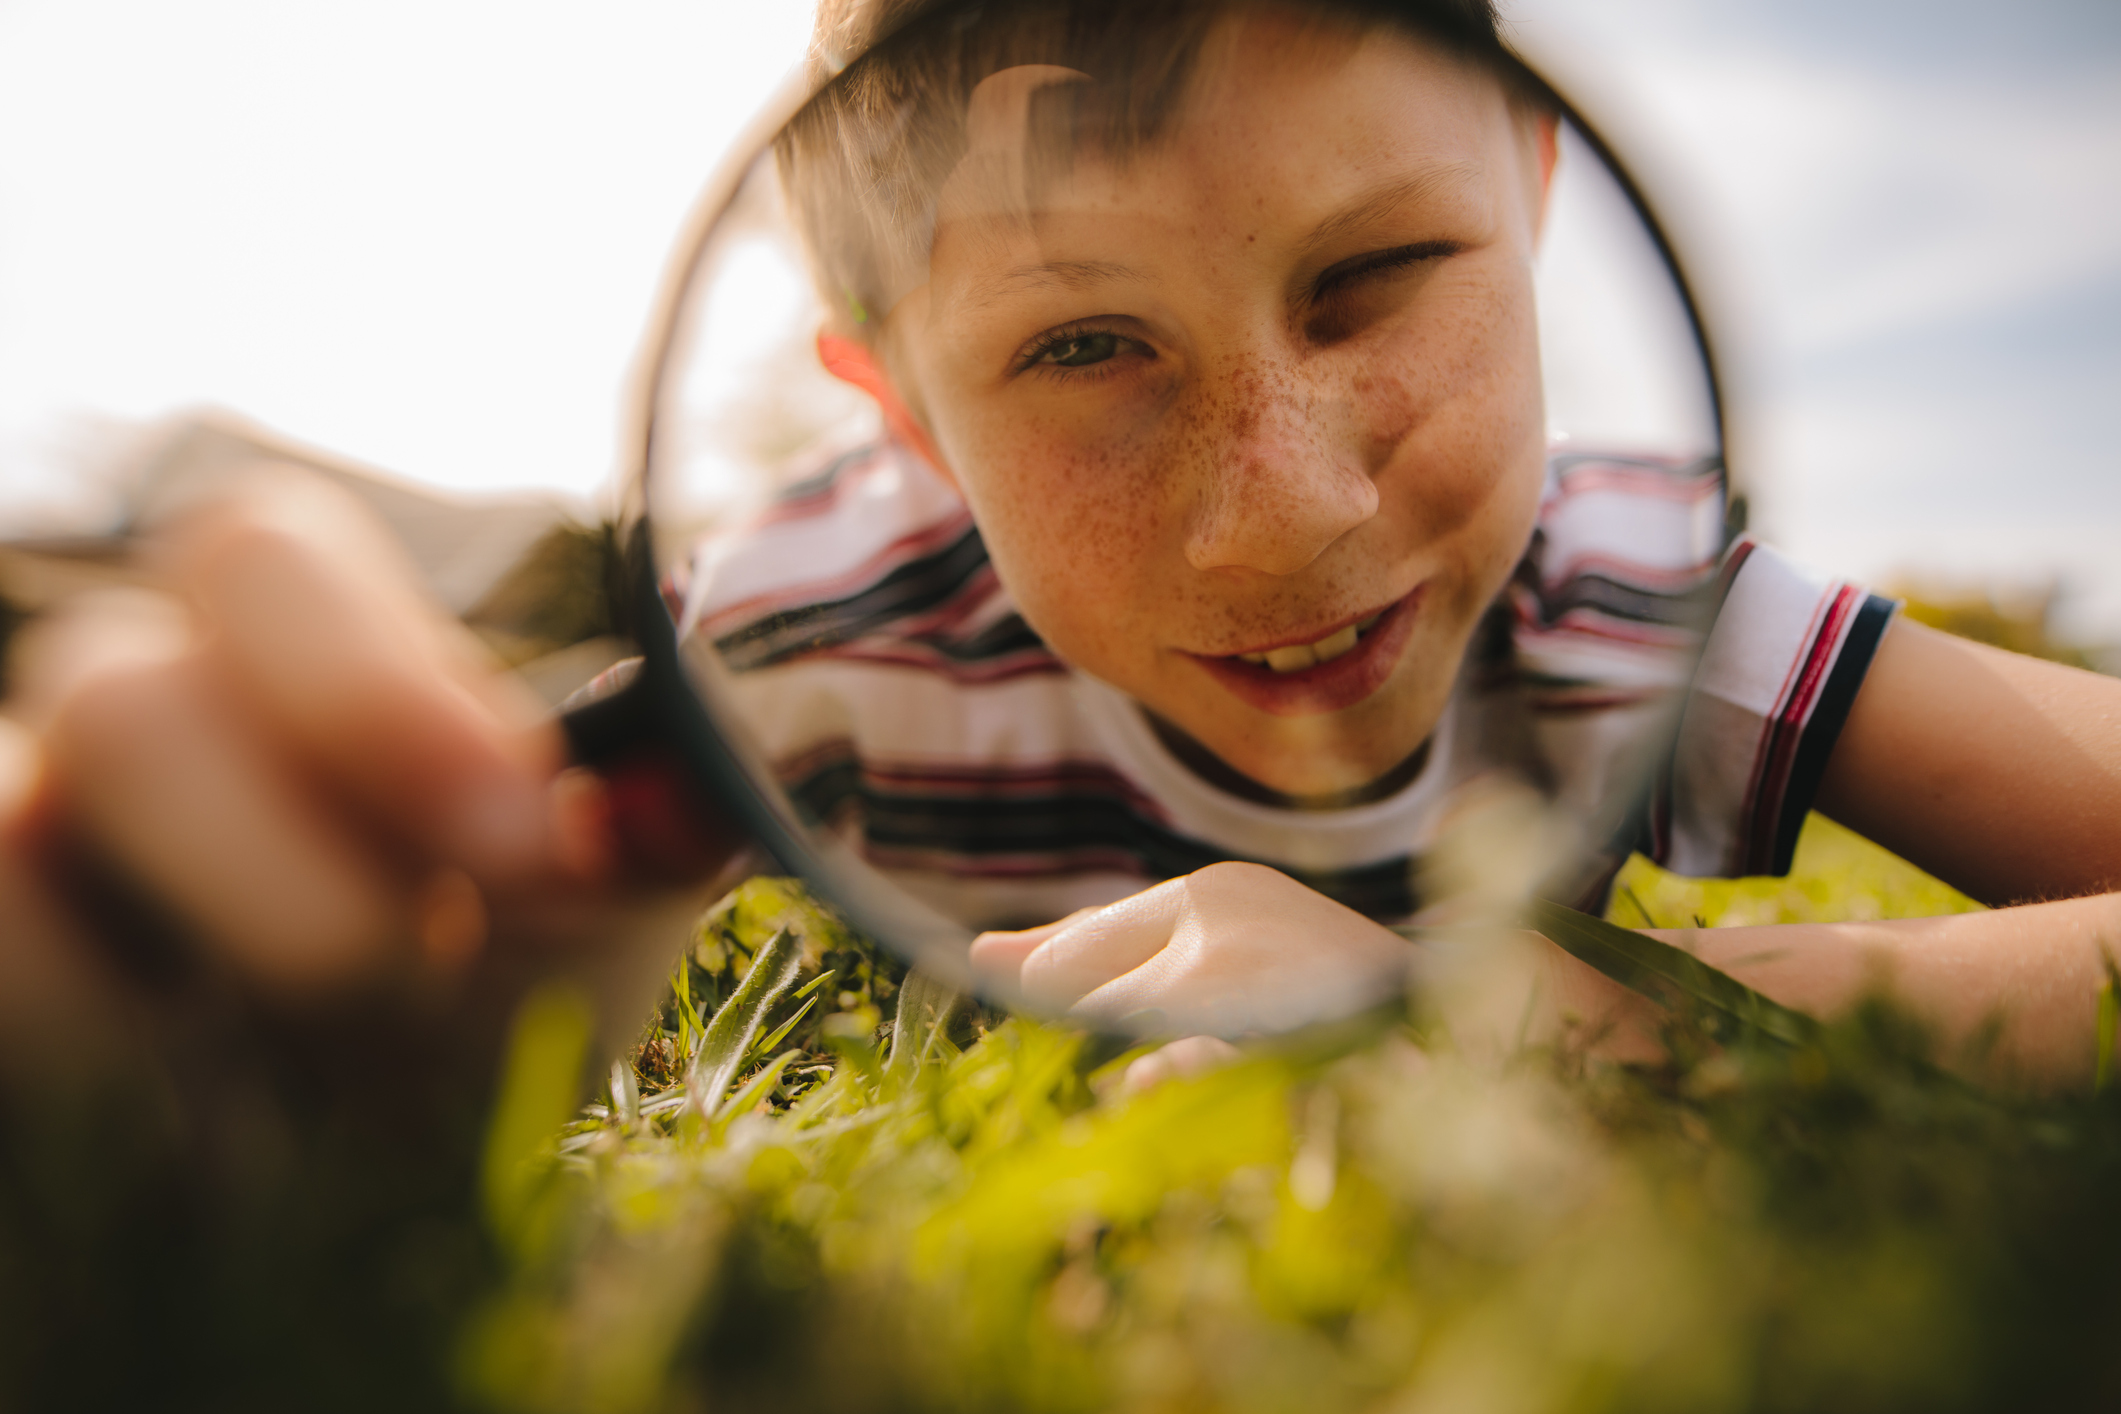 Boy looking through magnifying glass. cute boy exploring with magnifying glass.